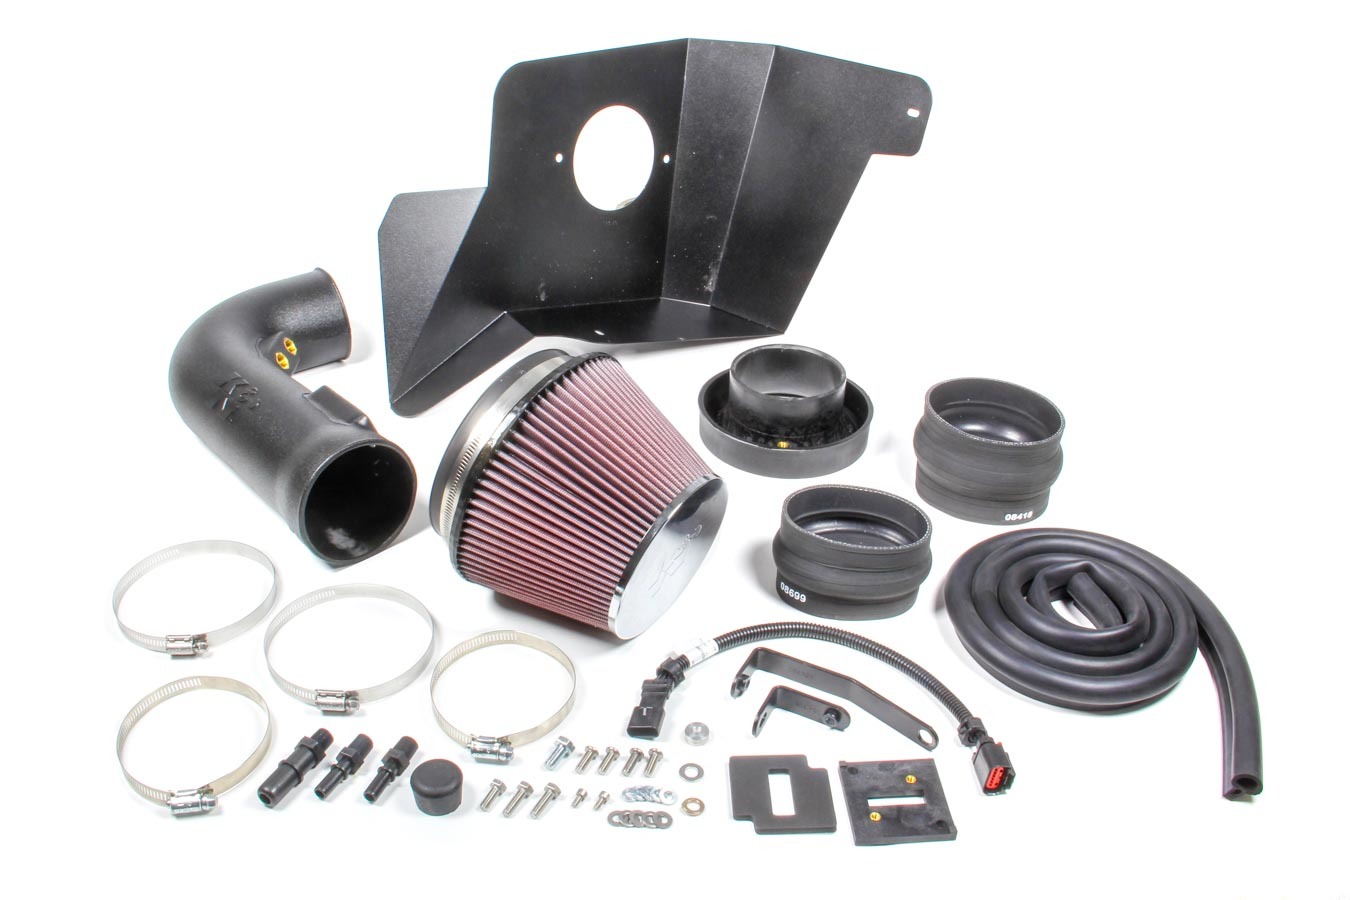 K & N Air Induction System, 63 Series AirCharger, Reusable Filter, Ford Coyote, Ford Mustang 2015-17, Kit